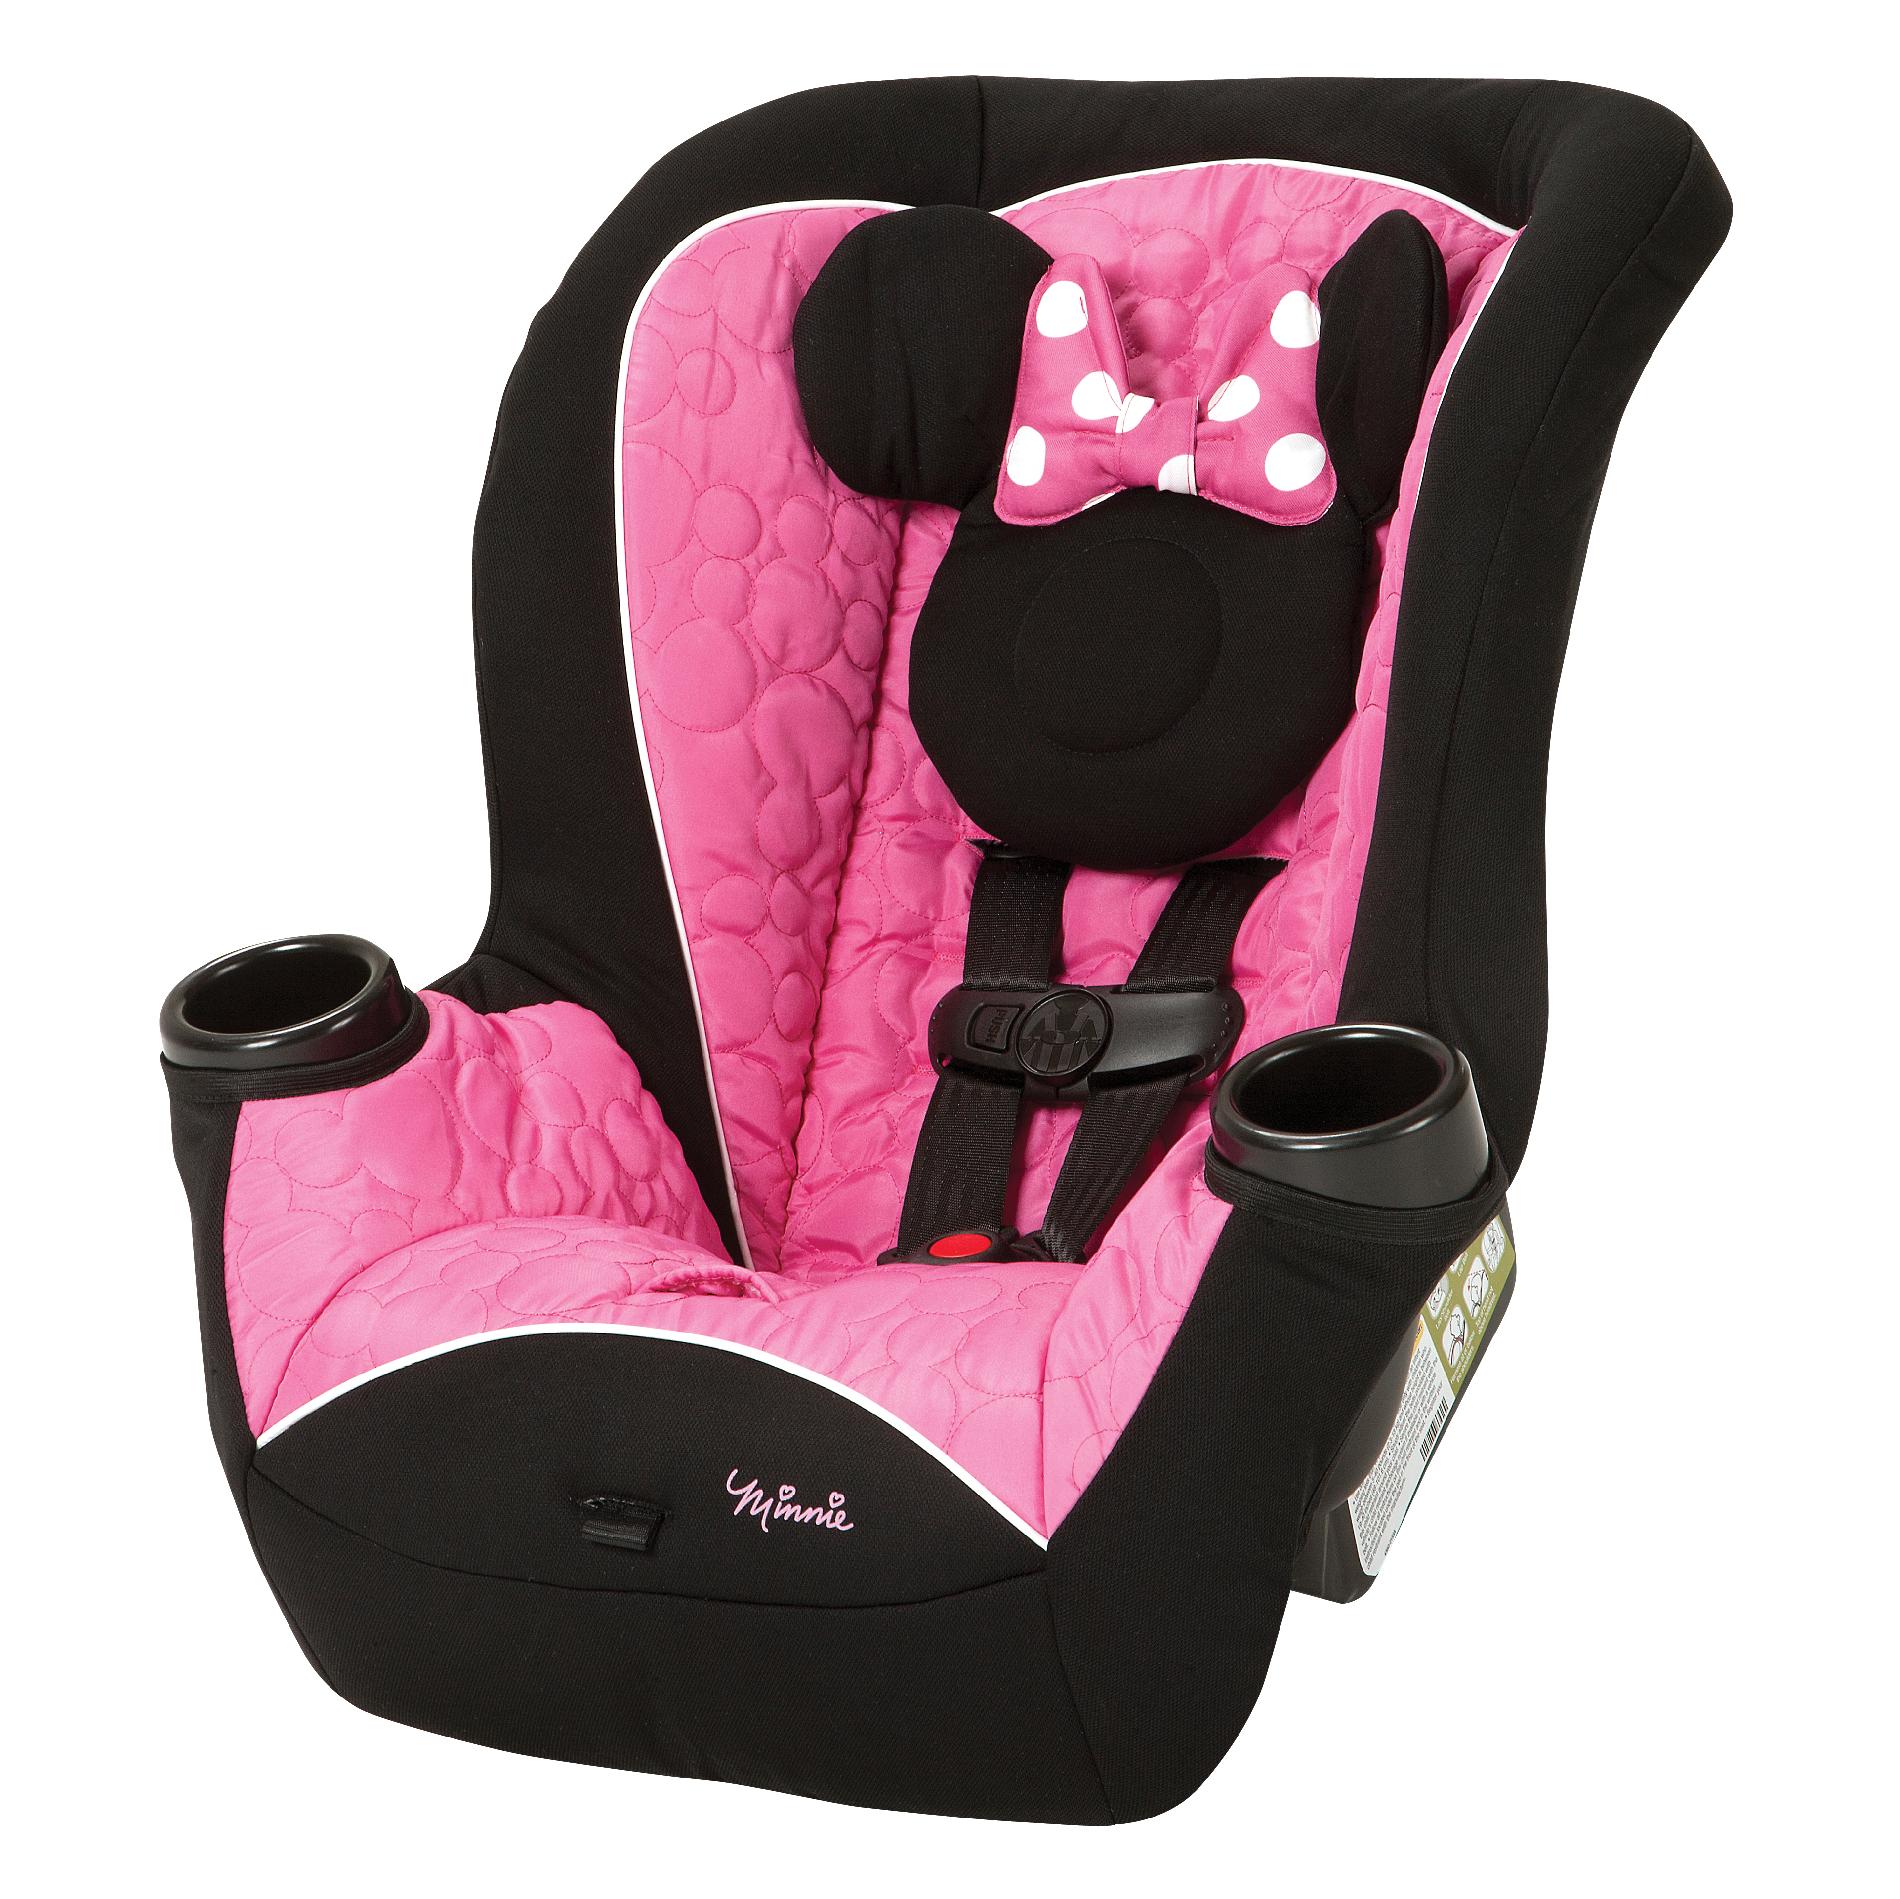 Why the Minnie Mouse Car Seat and Stroller is a great investment for parents?